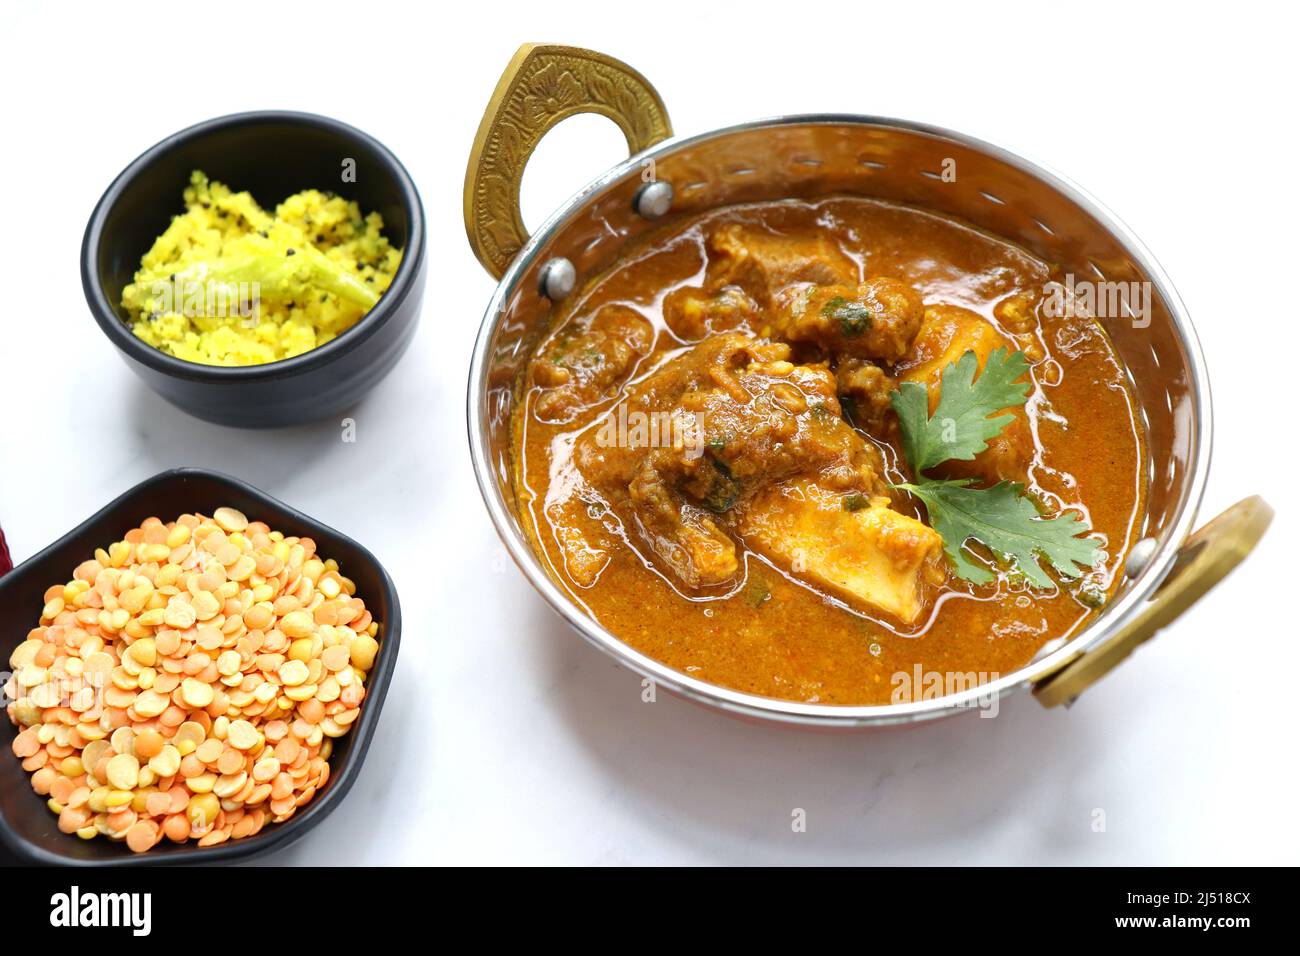 Dal Gosht or Daal Gosht is one of the very popular Mutton Recipes in India. Mutton cooked with spices and mixed lentils. Mutton dalcha. Stock Photo